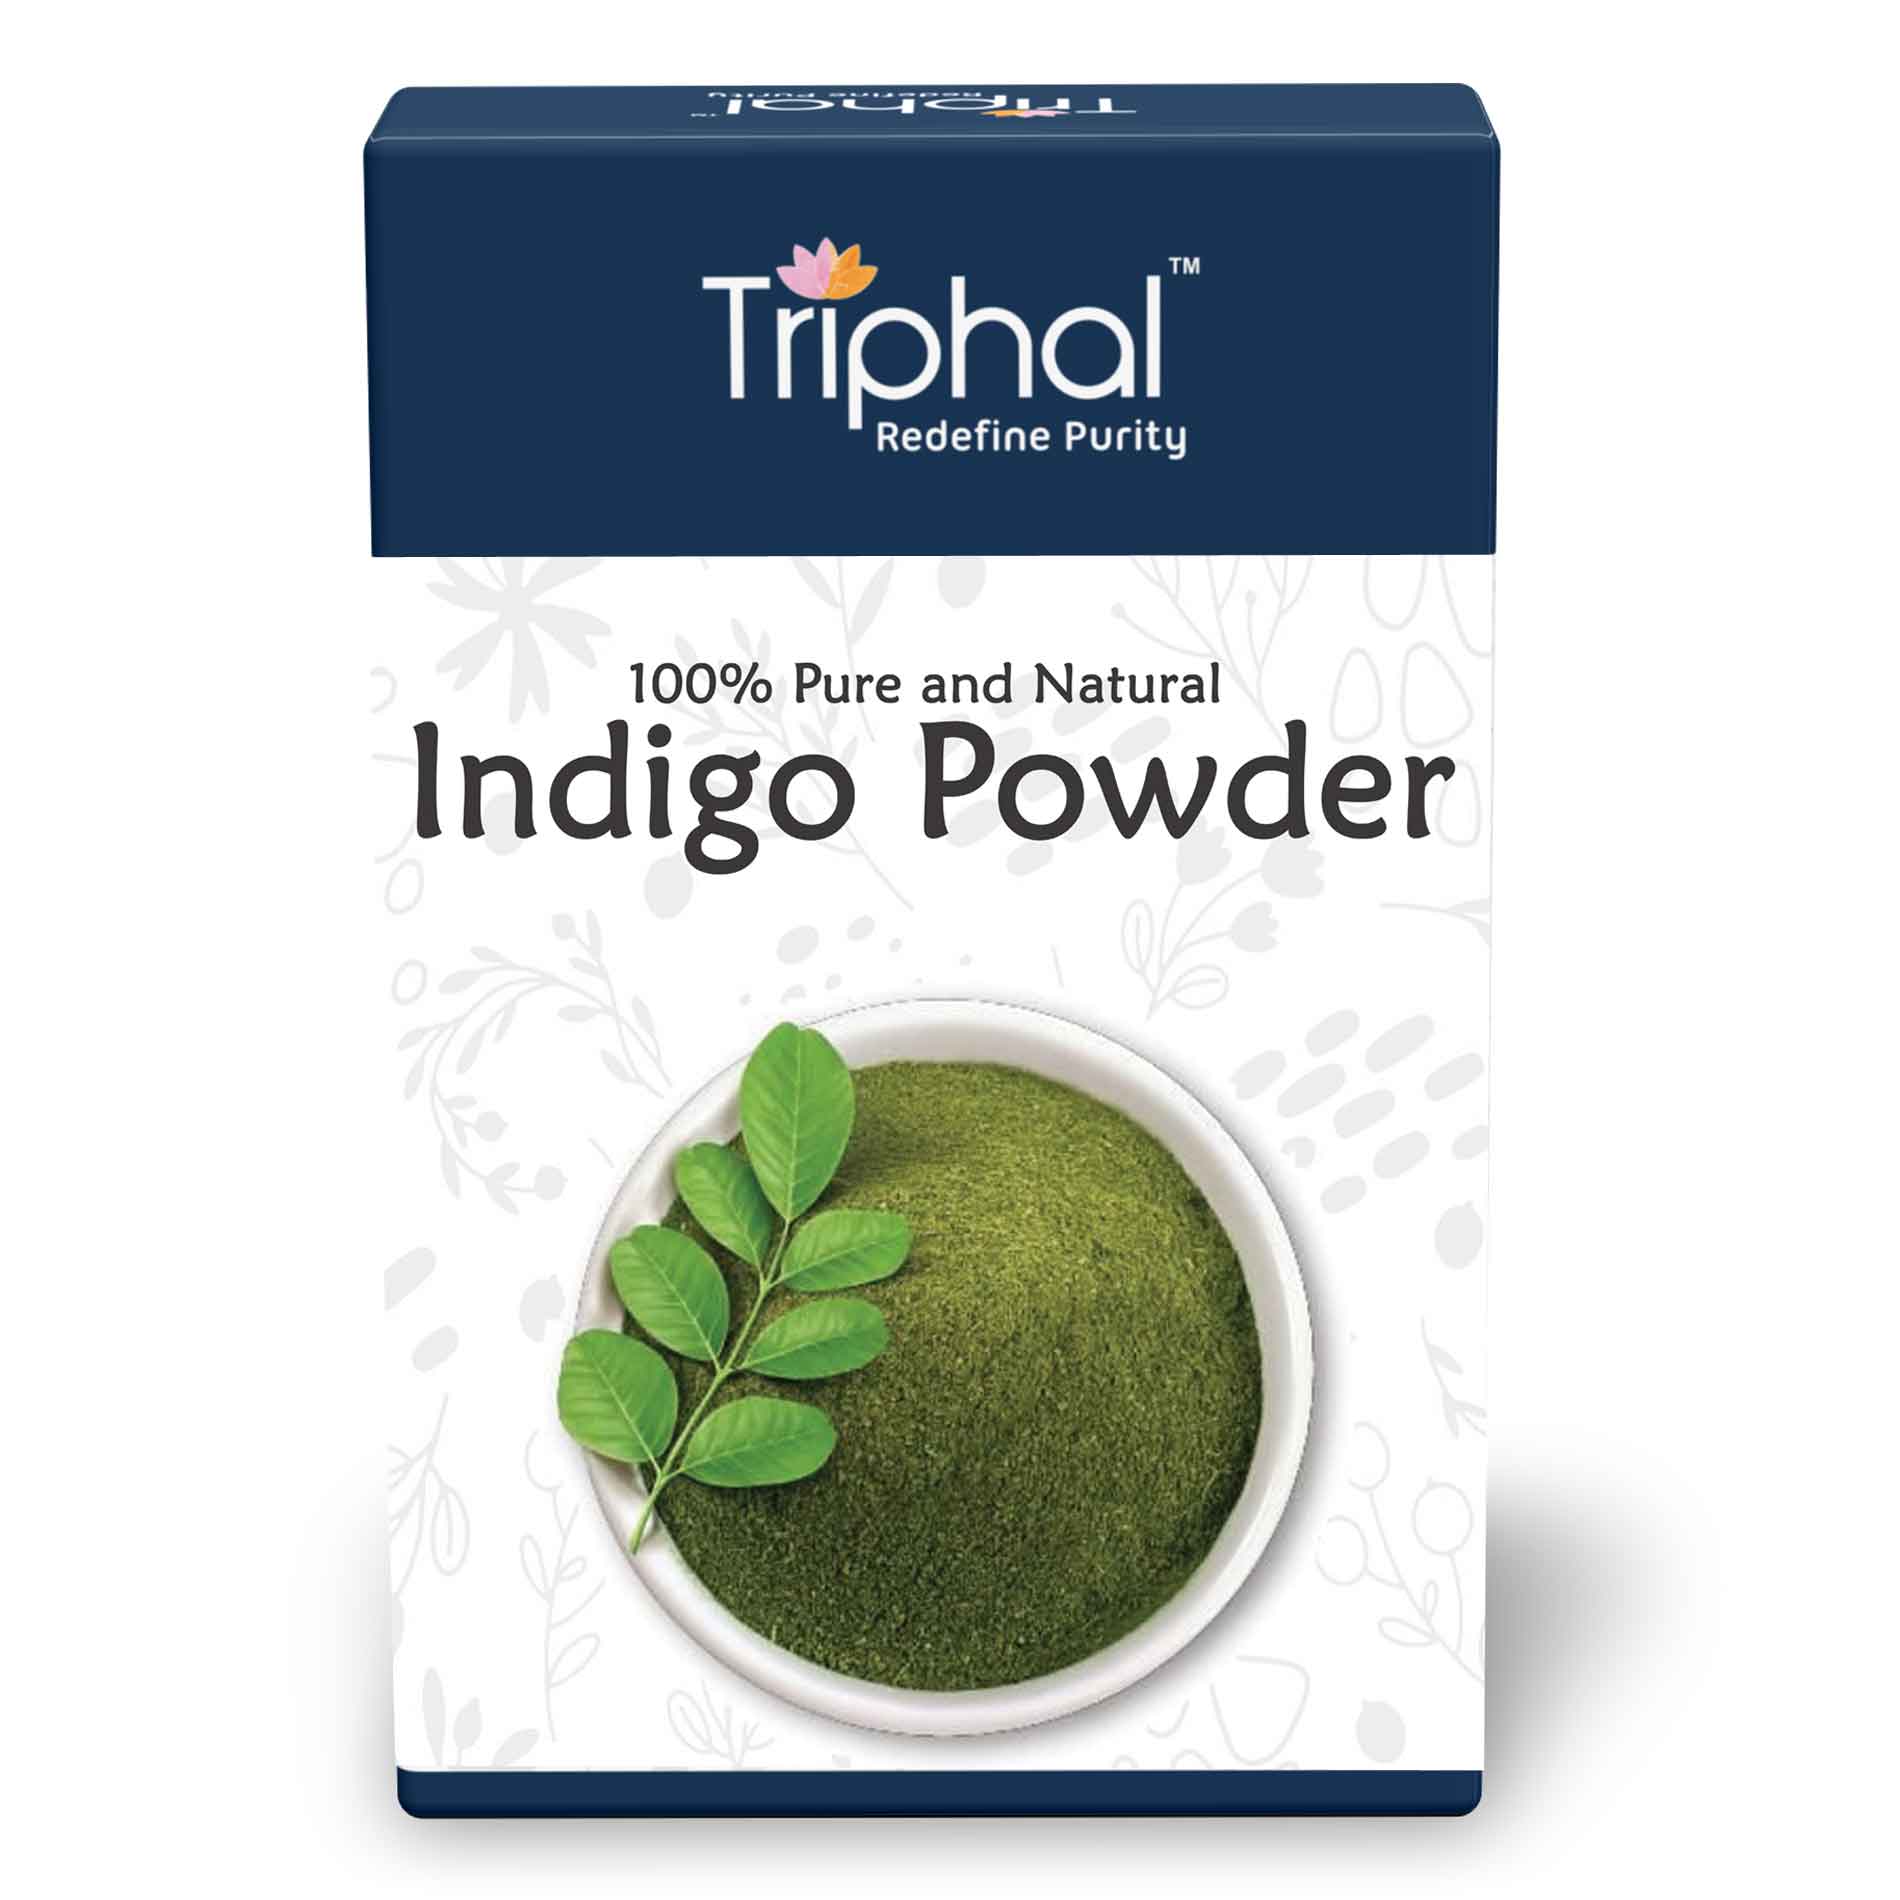 Top Quality Store 100% Pure & Natural Indigo Powder Herbal Hair Colorant -  Price in India, Buy Top Quality Store 100% Pure & Natural Indigo Powder  Herbal Hair Colorant Online In India